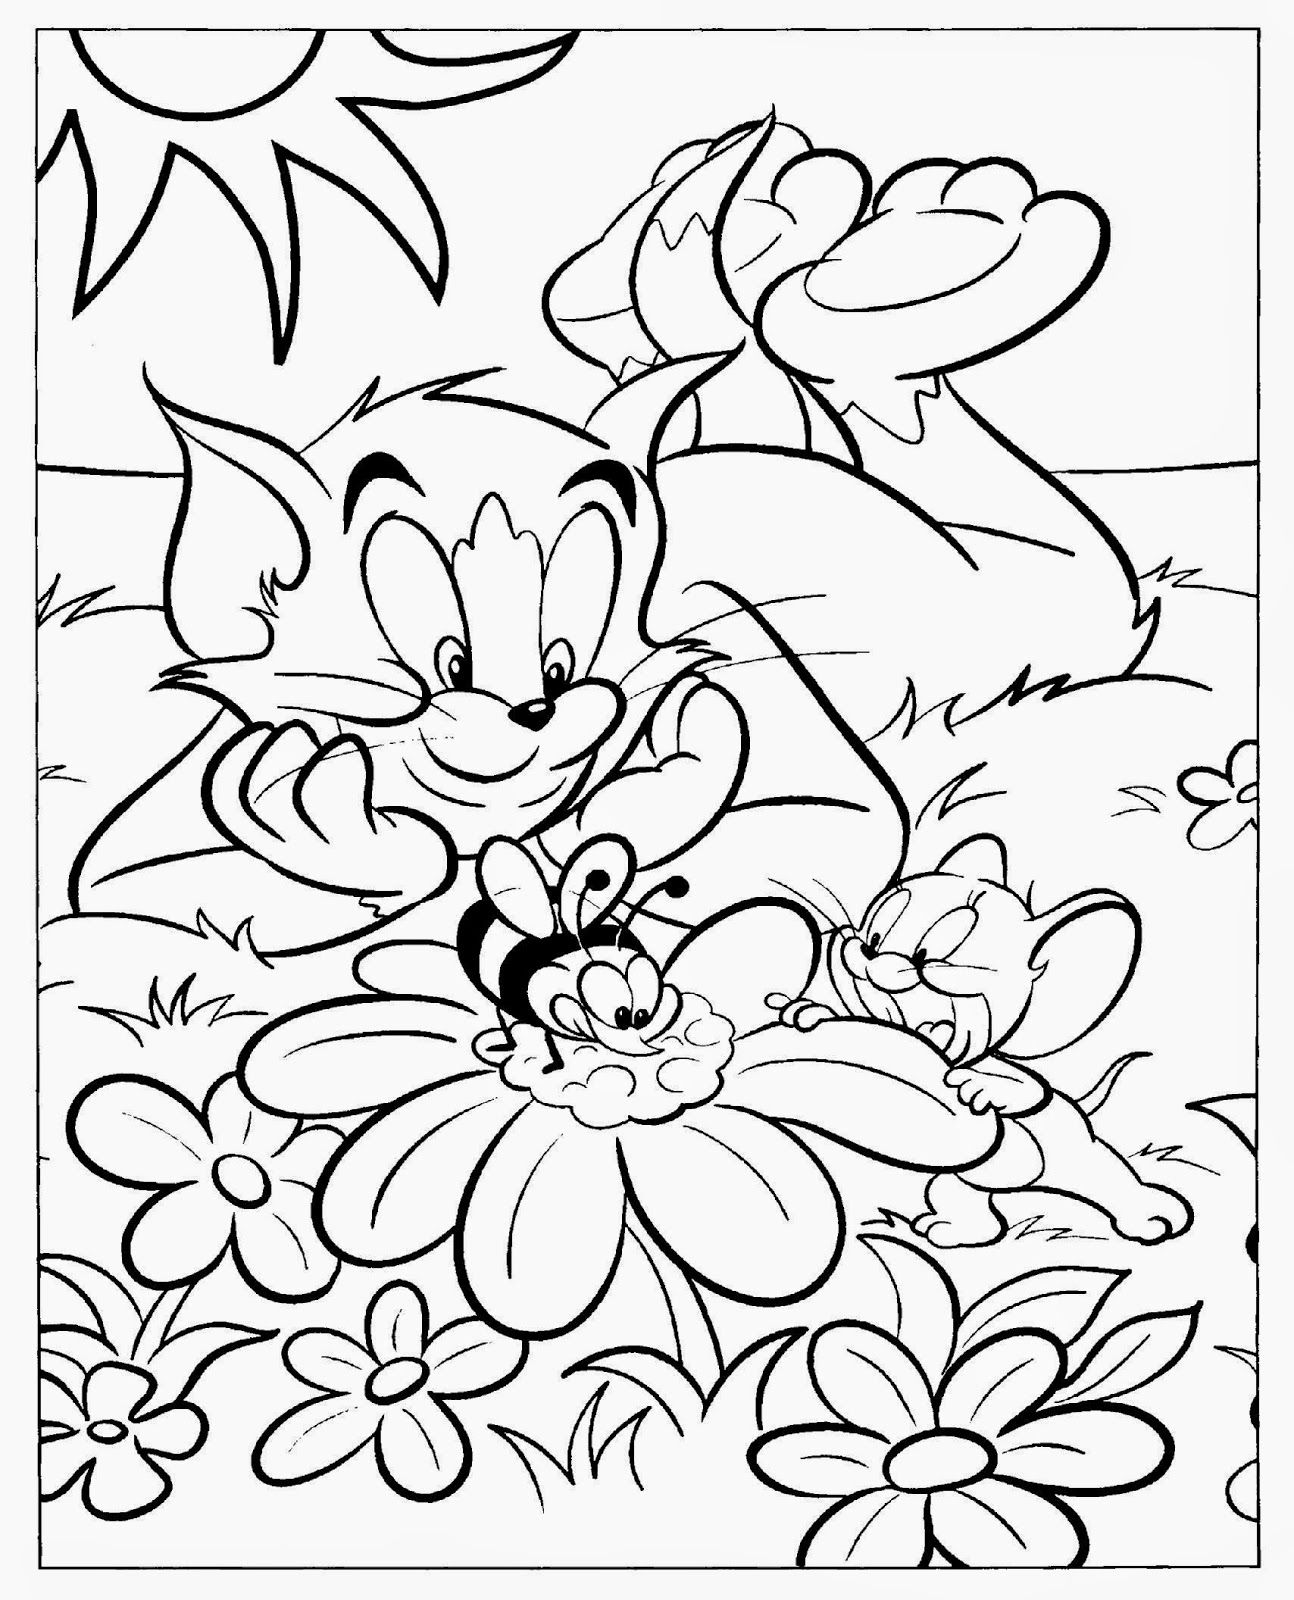 Free Coloring Pages Cartoon Network Download Free Coloring Pages